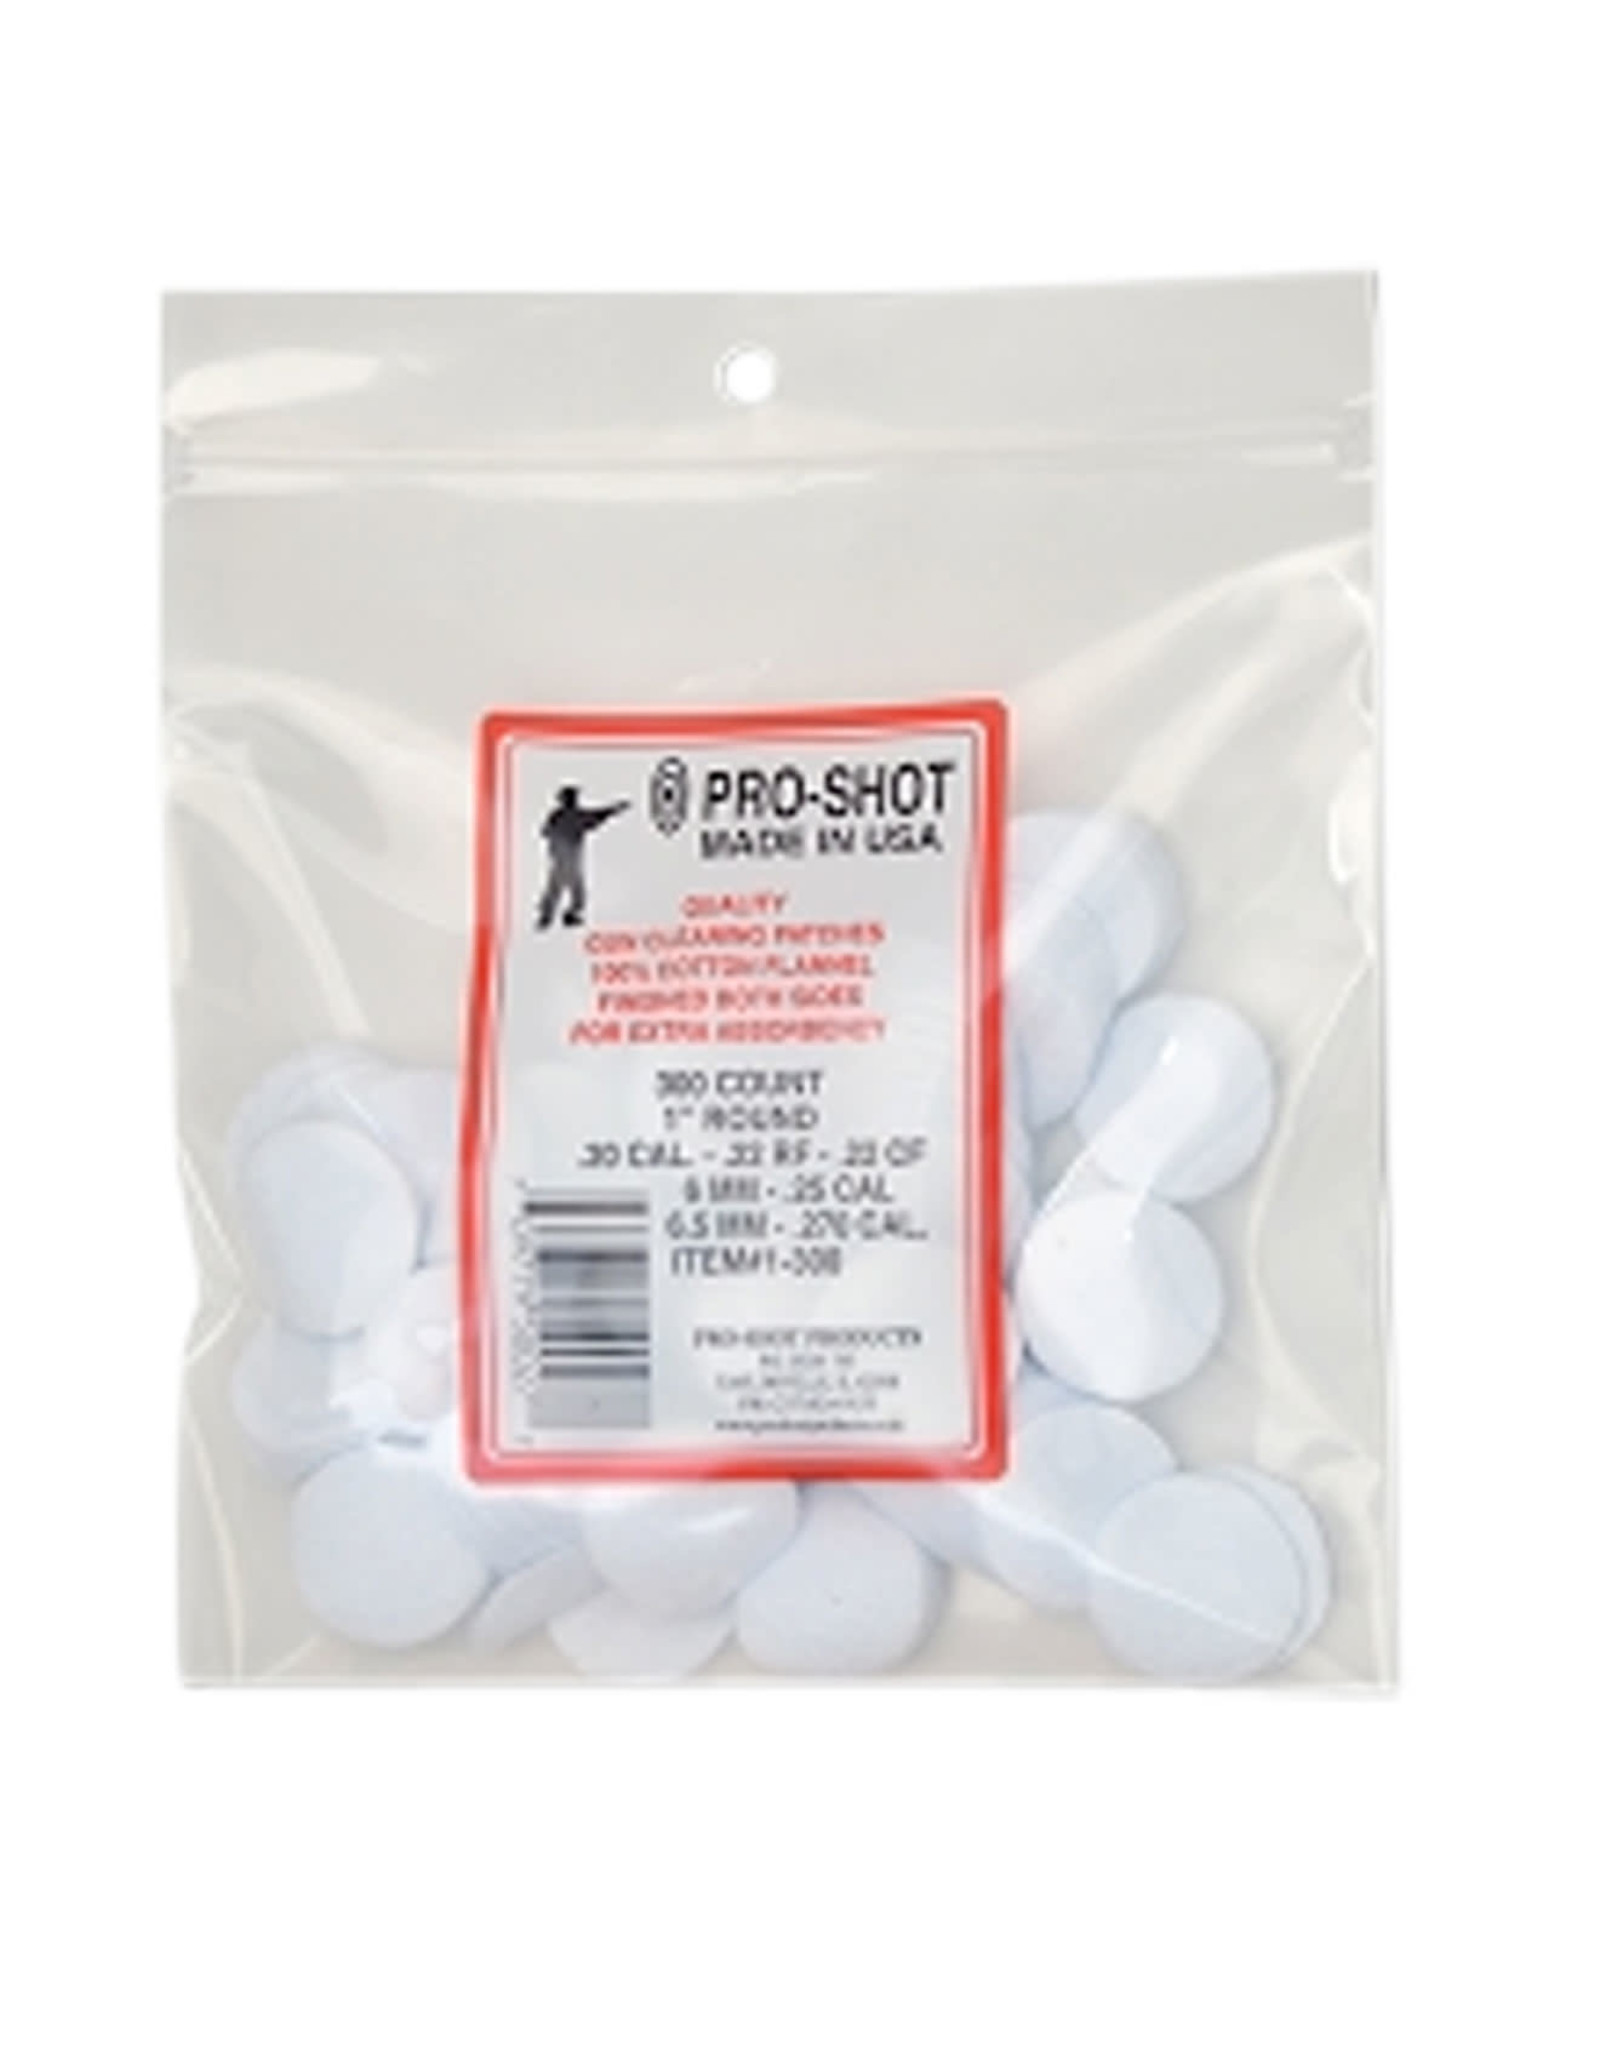 Pro-Shot Cleaning Patches .22-270 Cal